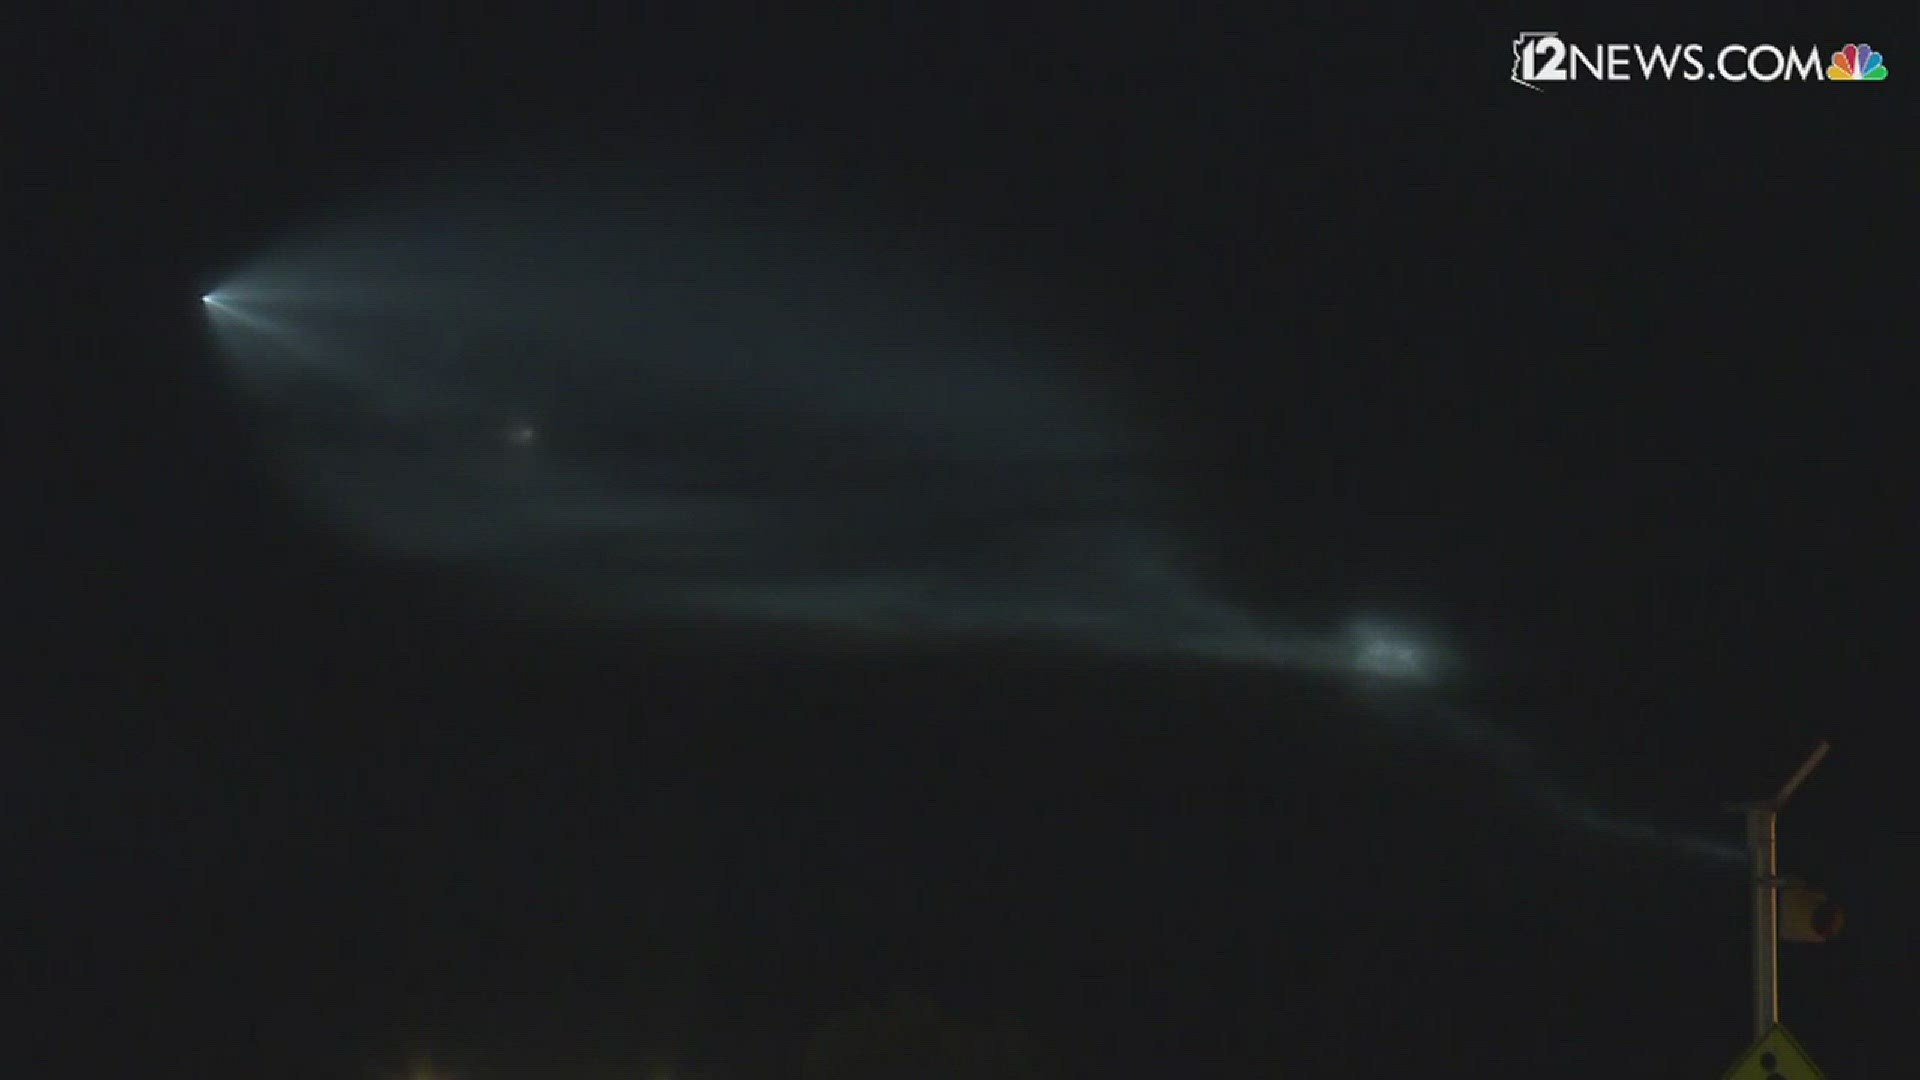 A rocket and vapor trail was spotted in the skies over Phoenix Friday night. It was a Falcon 9 rocket carrying communications satellites.